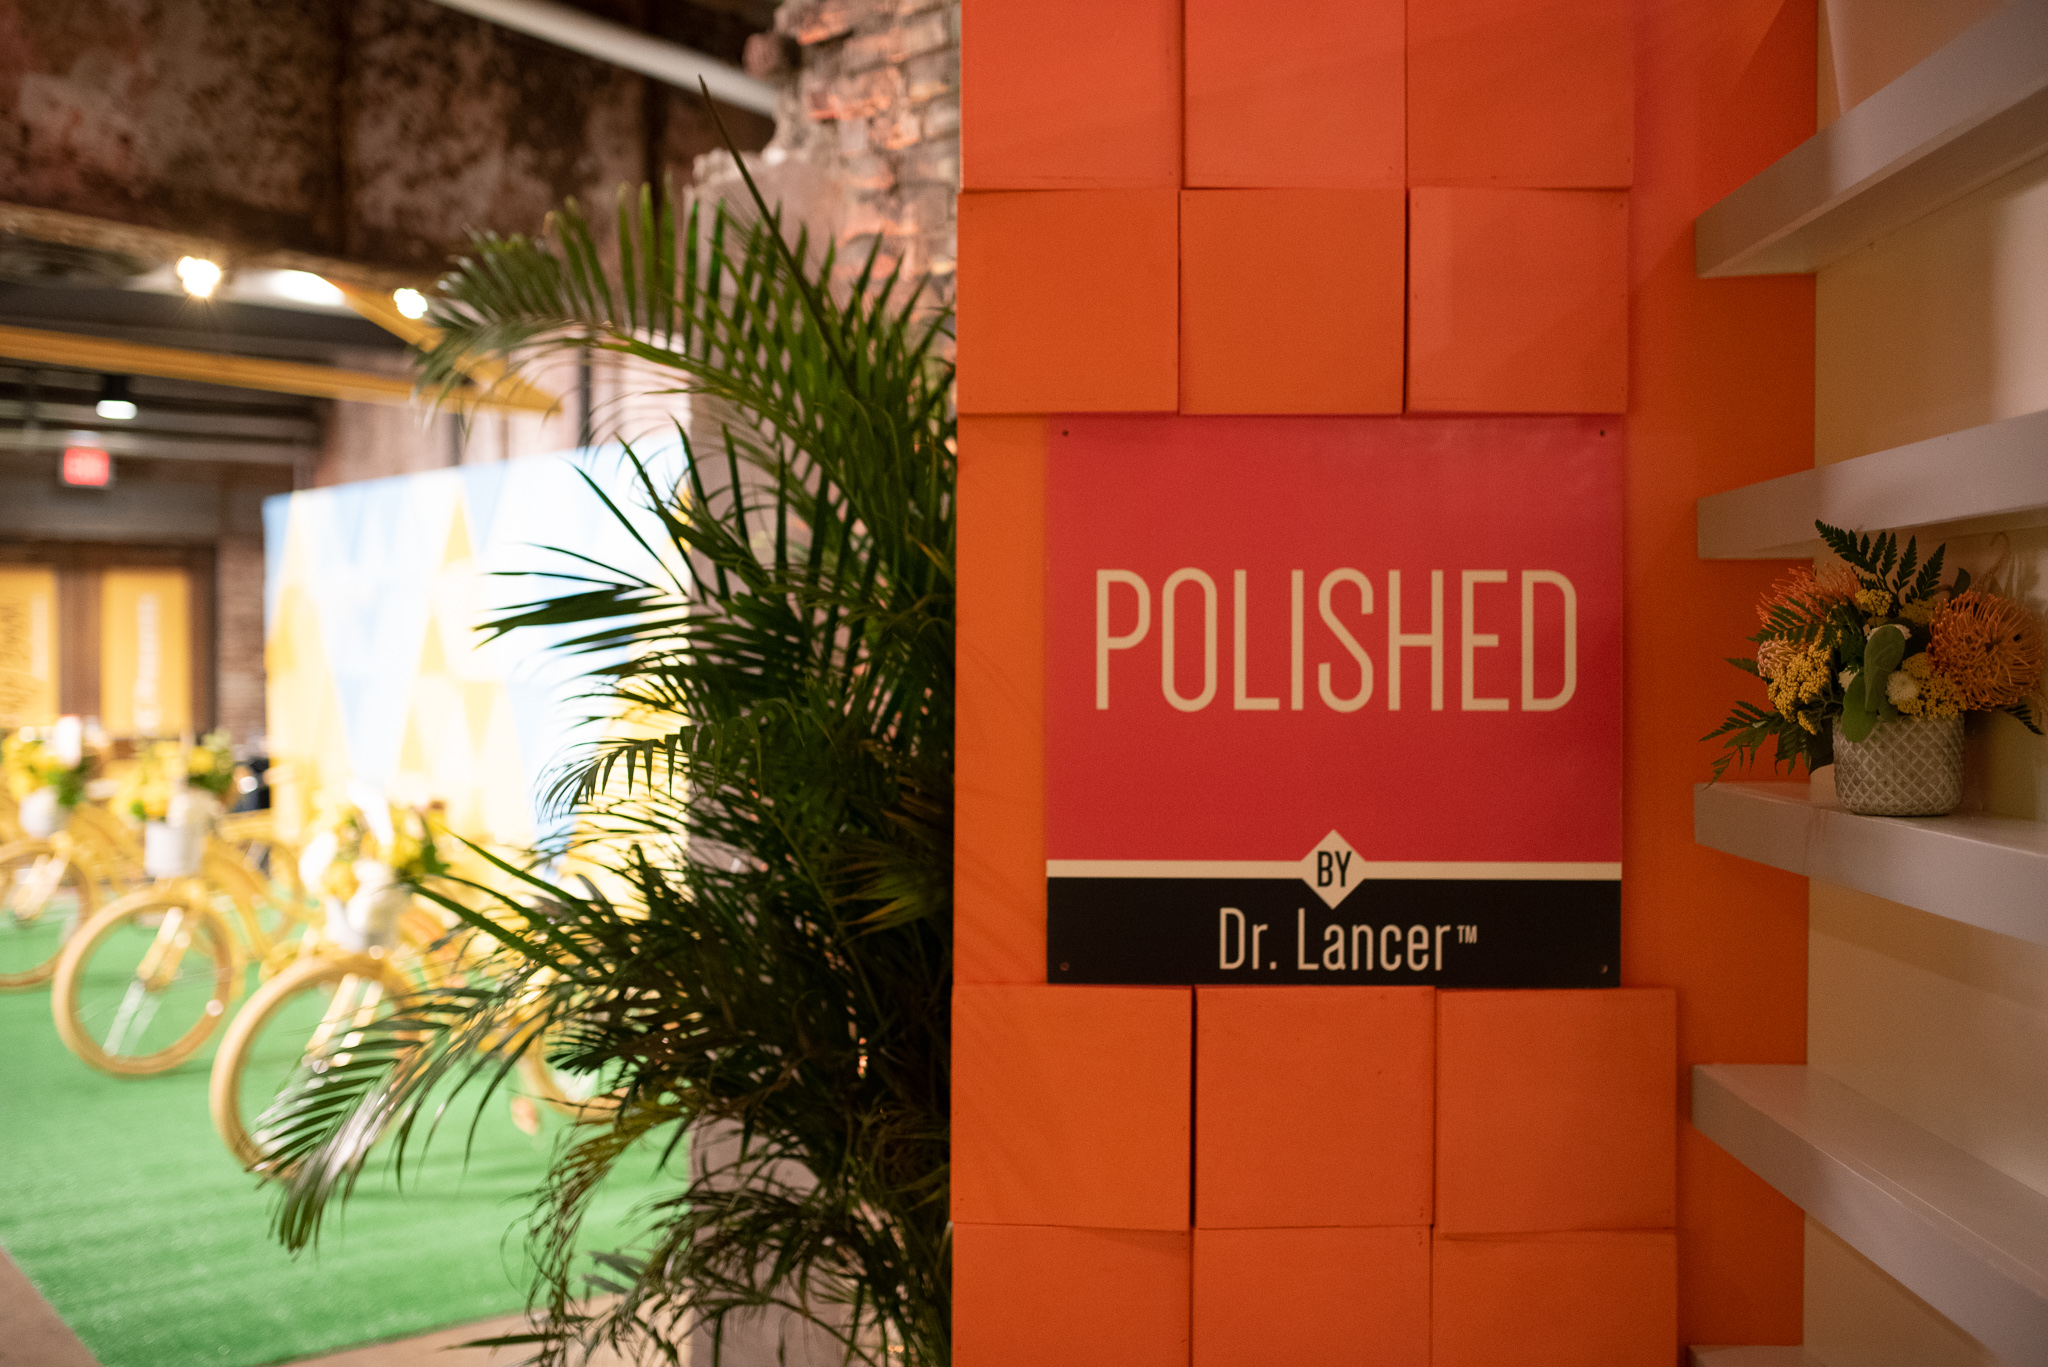 QVC Beauty Bash at The Fillmore, Booth Production for Polished by Dr. Lancer. Photo: @DRUF